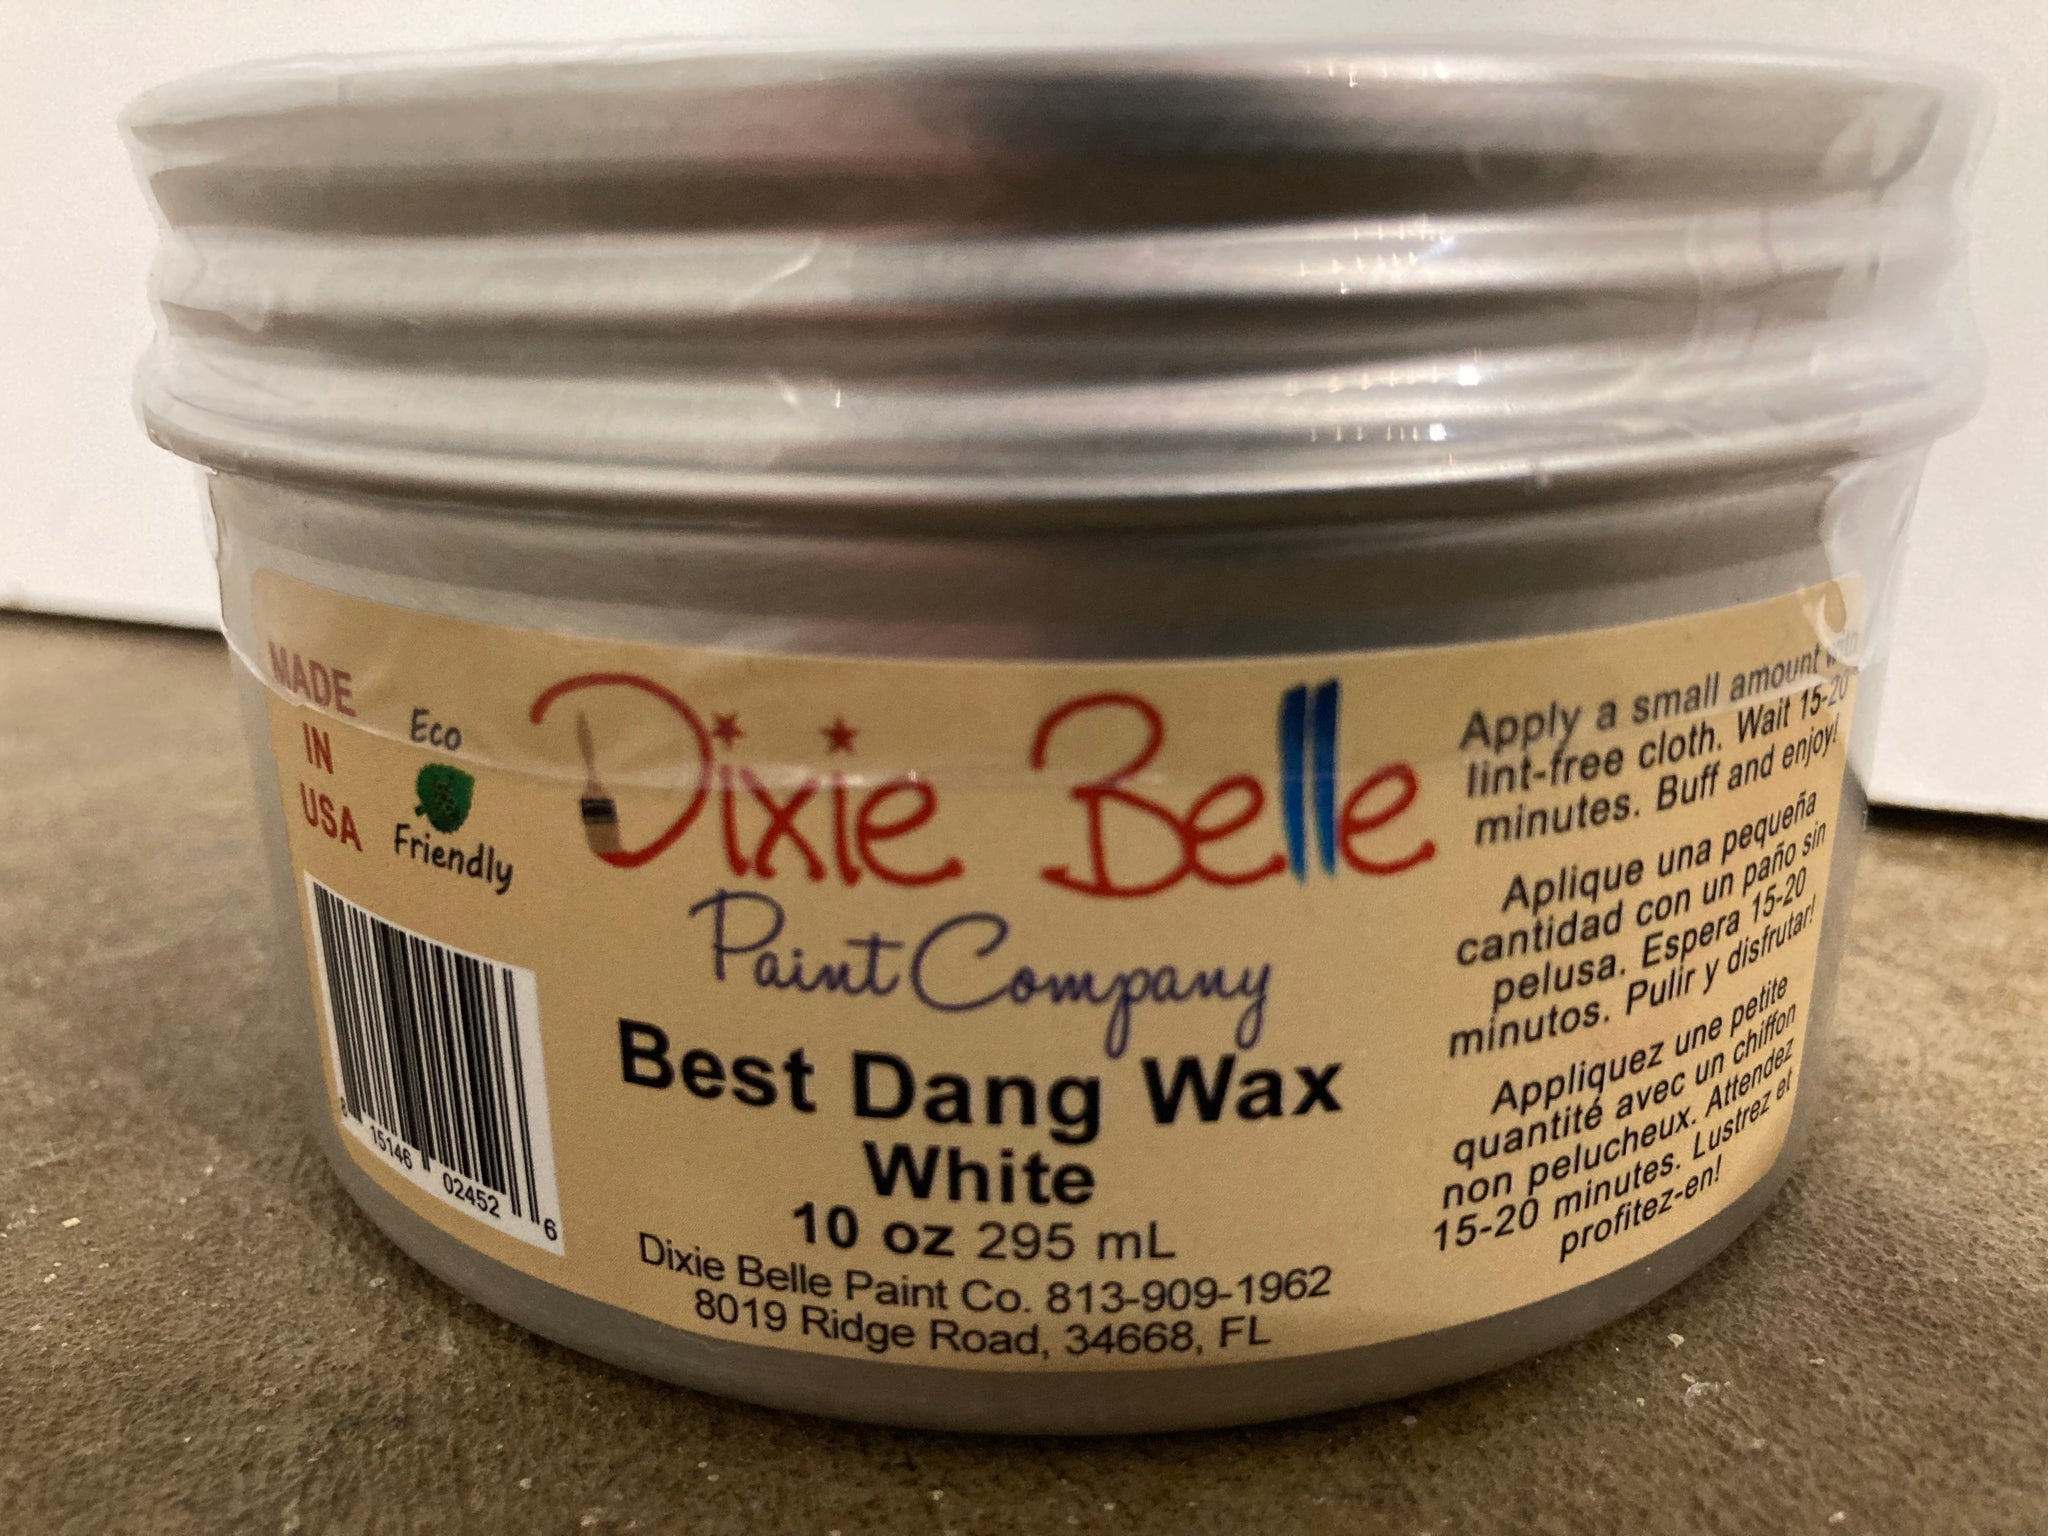 Dixie Belle Best Dang Wax: Why Choose This Wax Product